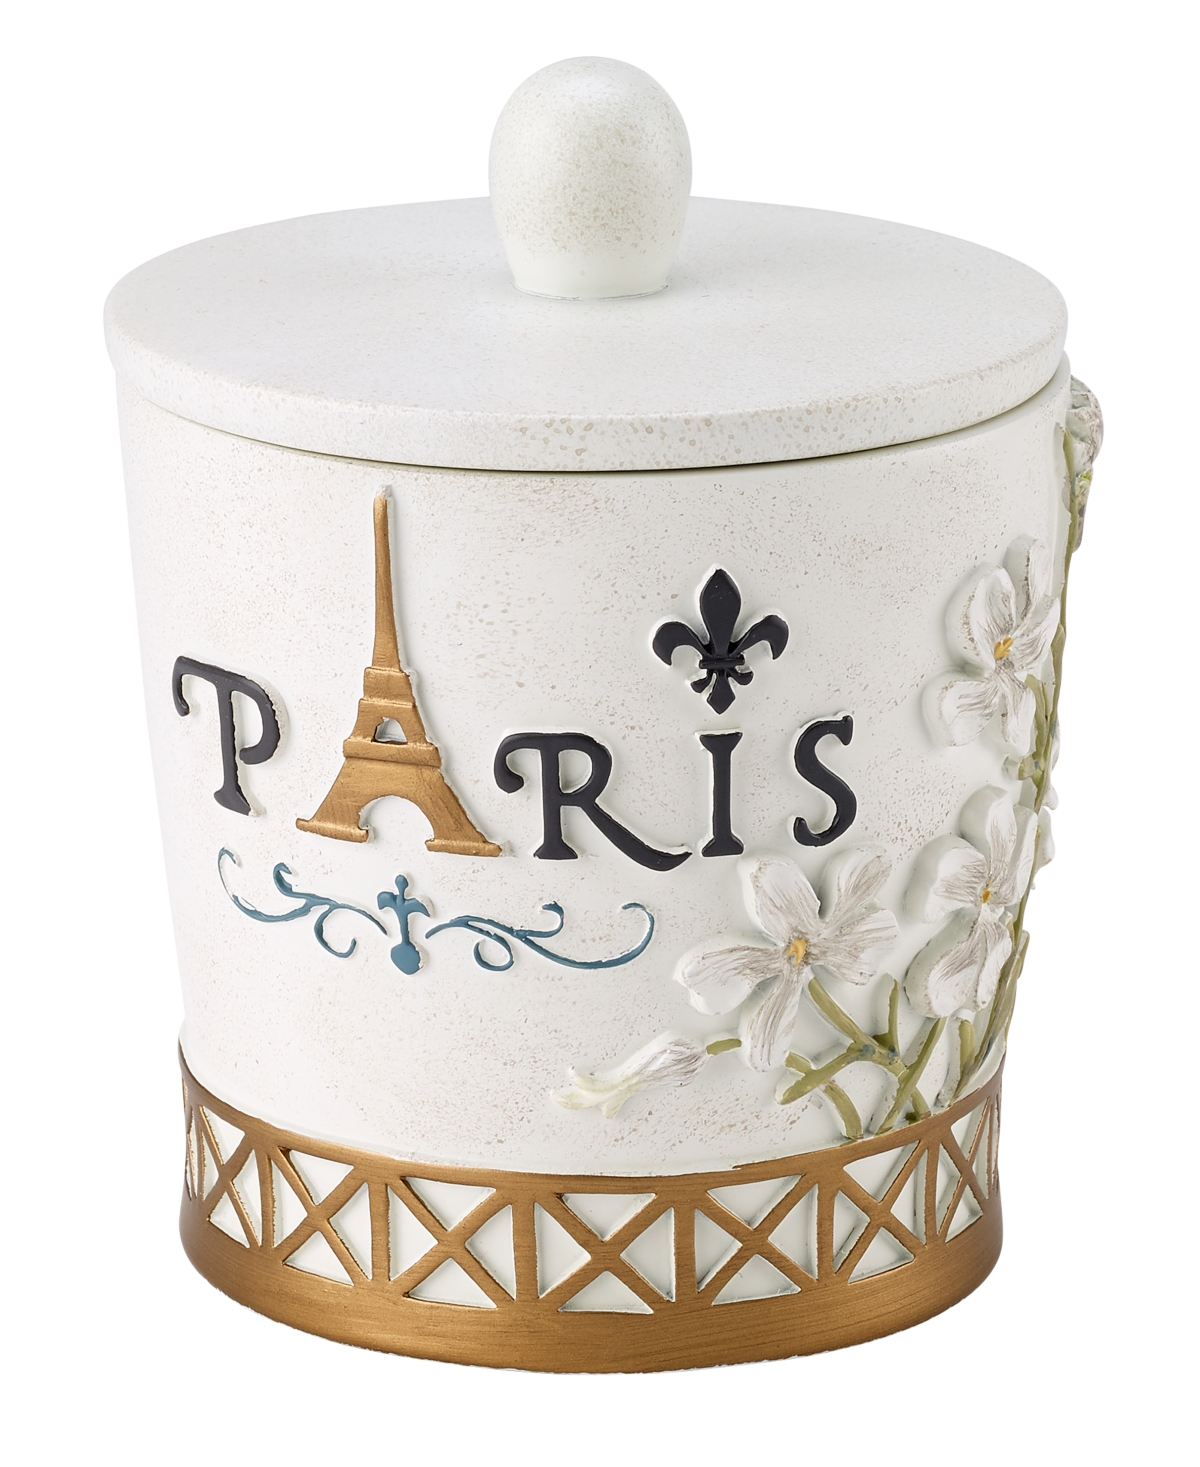 Paris Botanique Hand Painted Resin Covered Jar - Ivory